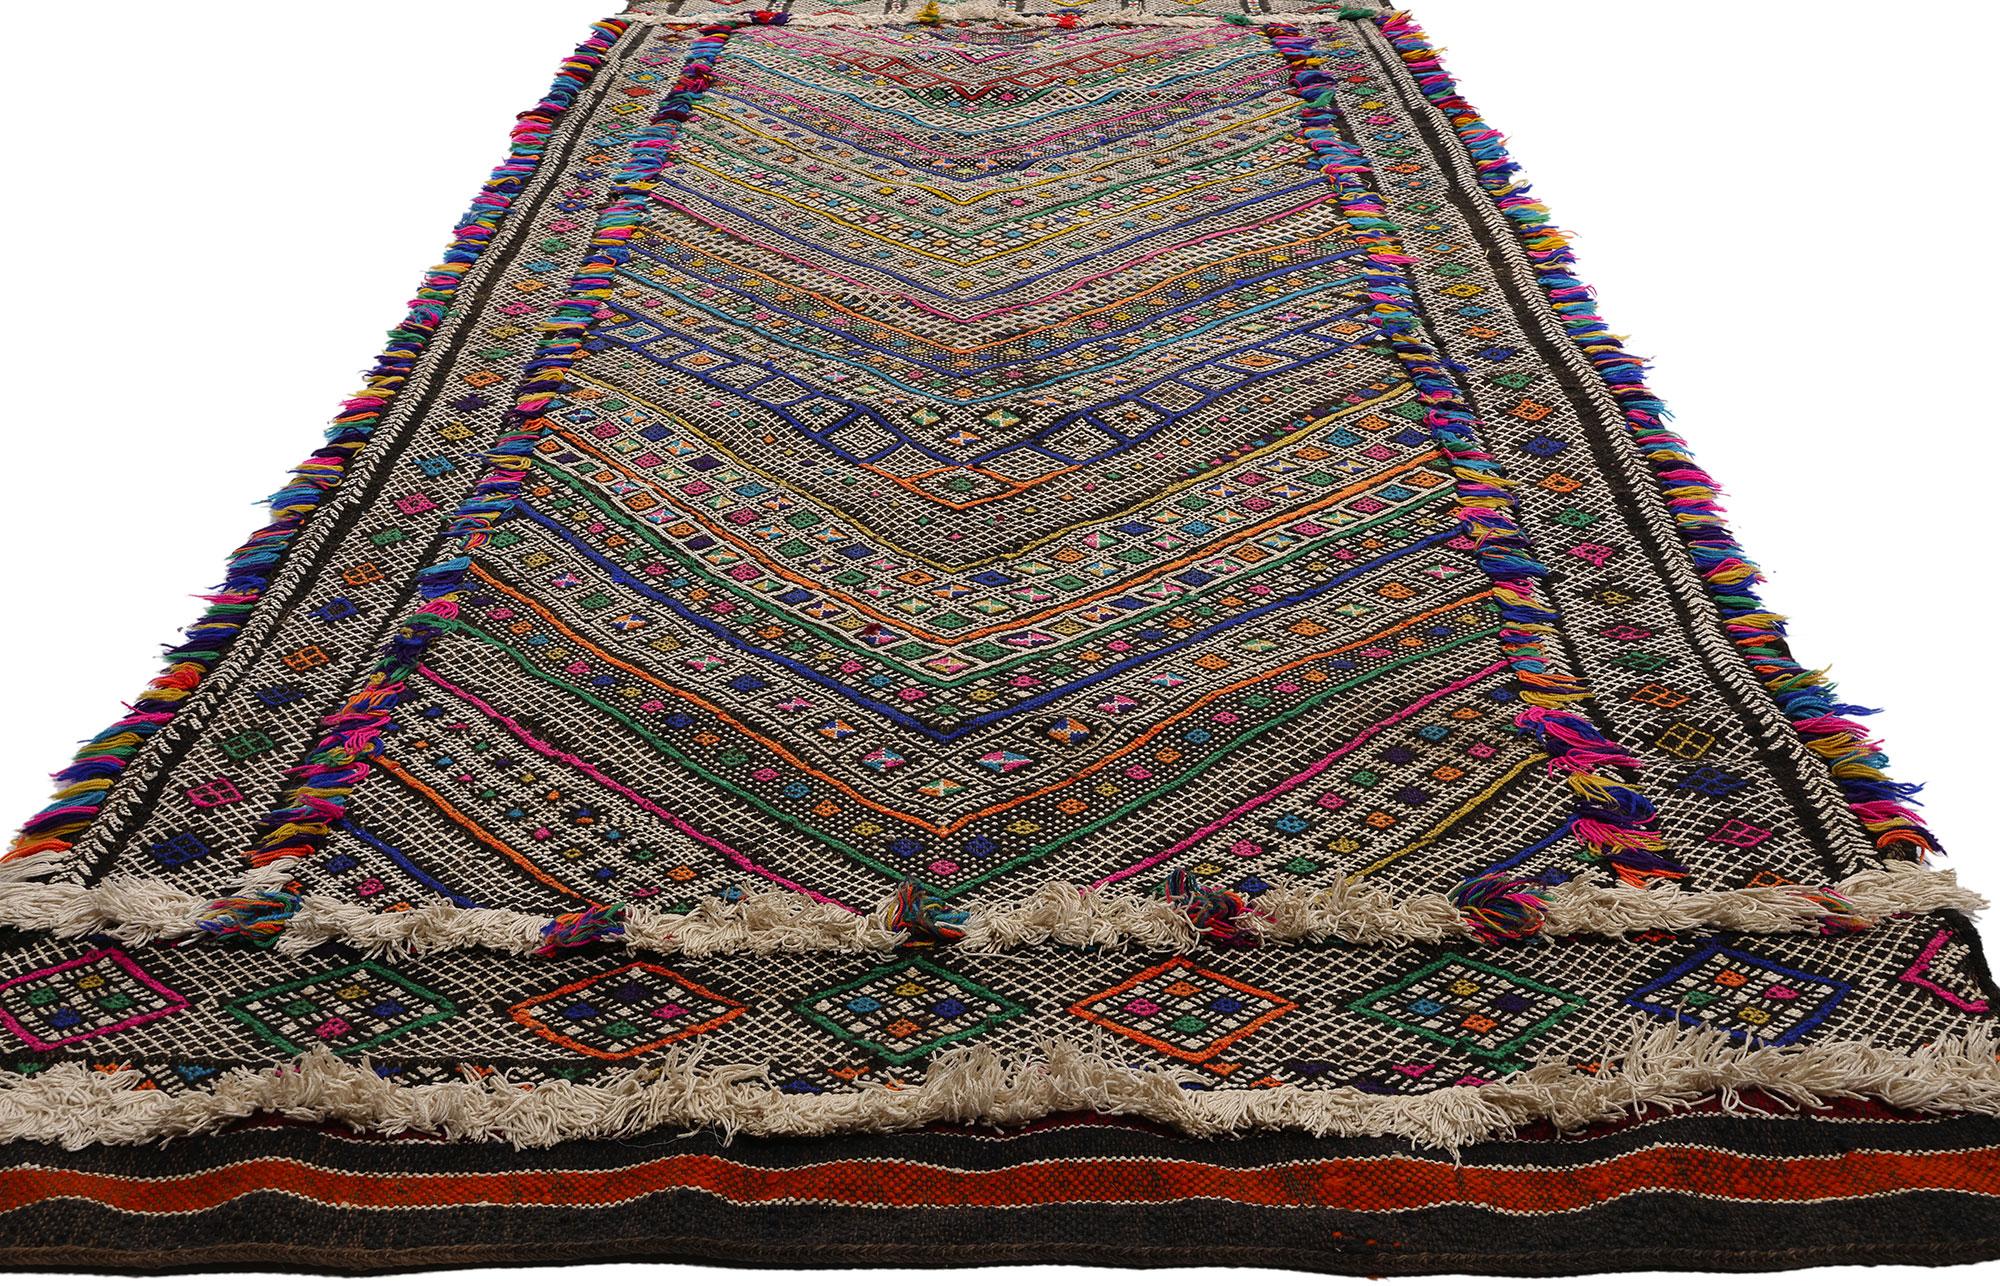 21848 Vintage Zemmour Moroccan Kilim Rug, 03'08 x 26'02. Introducing an enchanting bohemian-inspired Moroccan kilim rug runner, meticulously handwoven with extra-long dimensions by the skilled artisans of the Zemmour Tribe nestled in the scenic